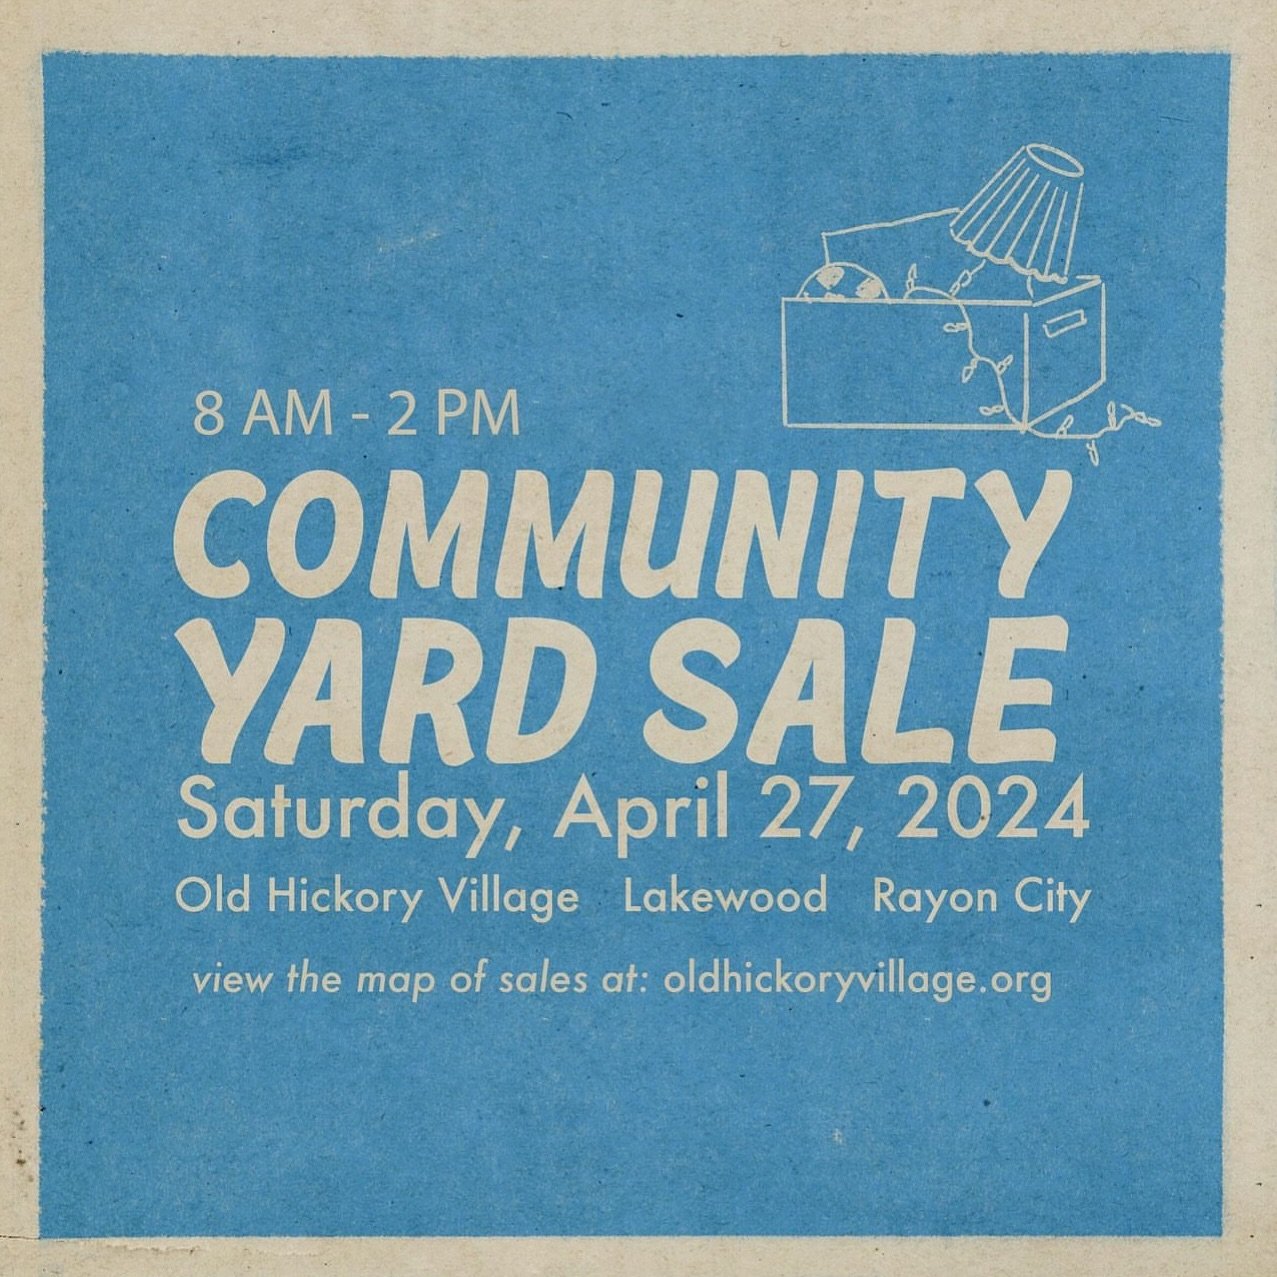 Join us this Saturday for this yard sale extravaganza! We&rsquo;ll be stationed right in front of Baby Snakes with a ton of treasures PLUS with 60+ participants from Lakewood, Old Hickory Village, and Rayon City, there will be so much to explore. Don